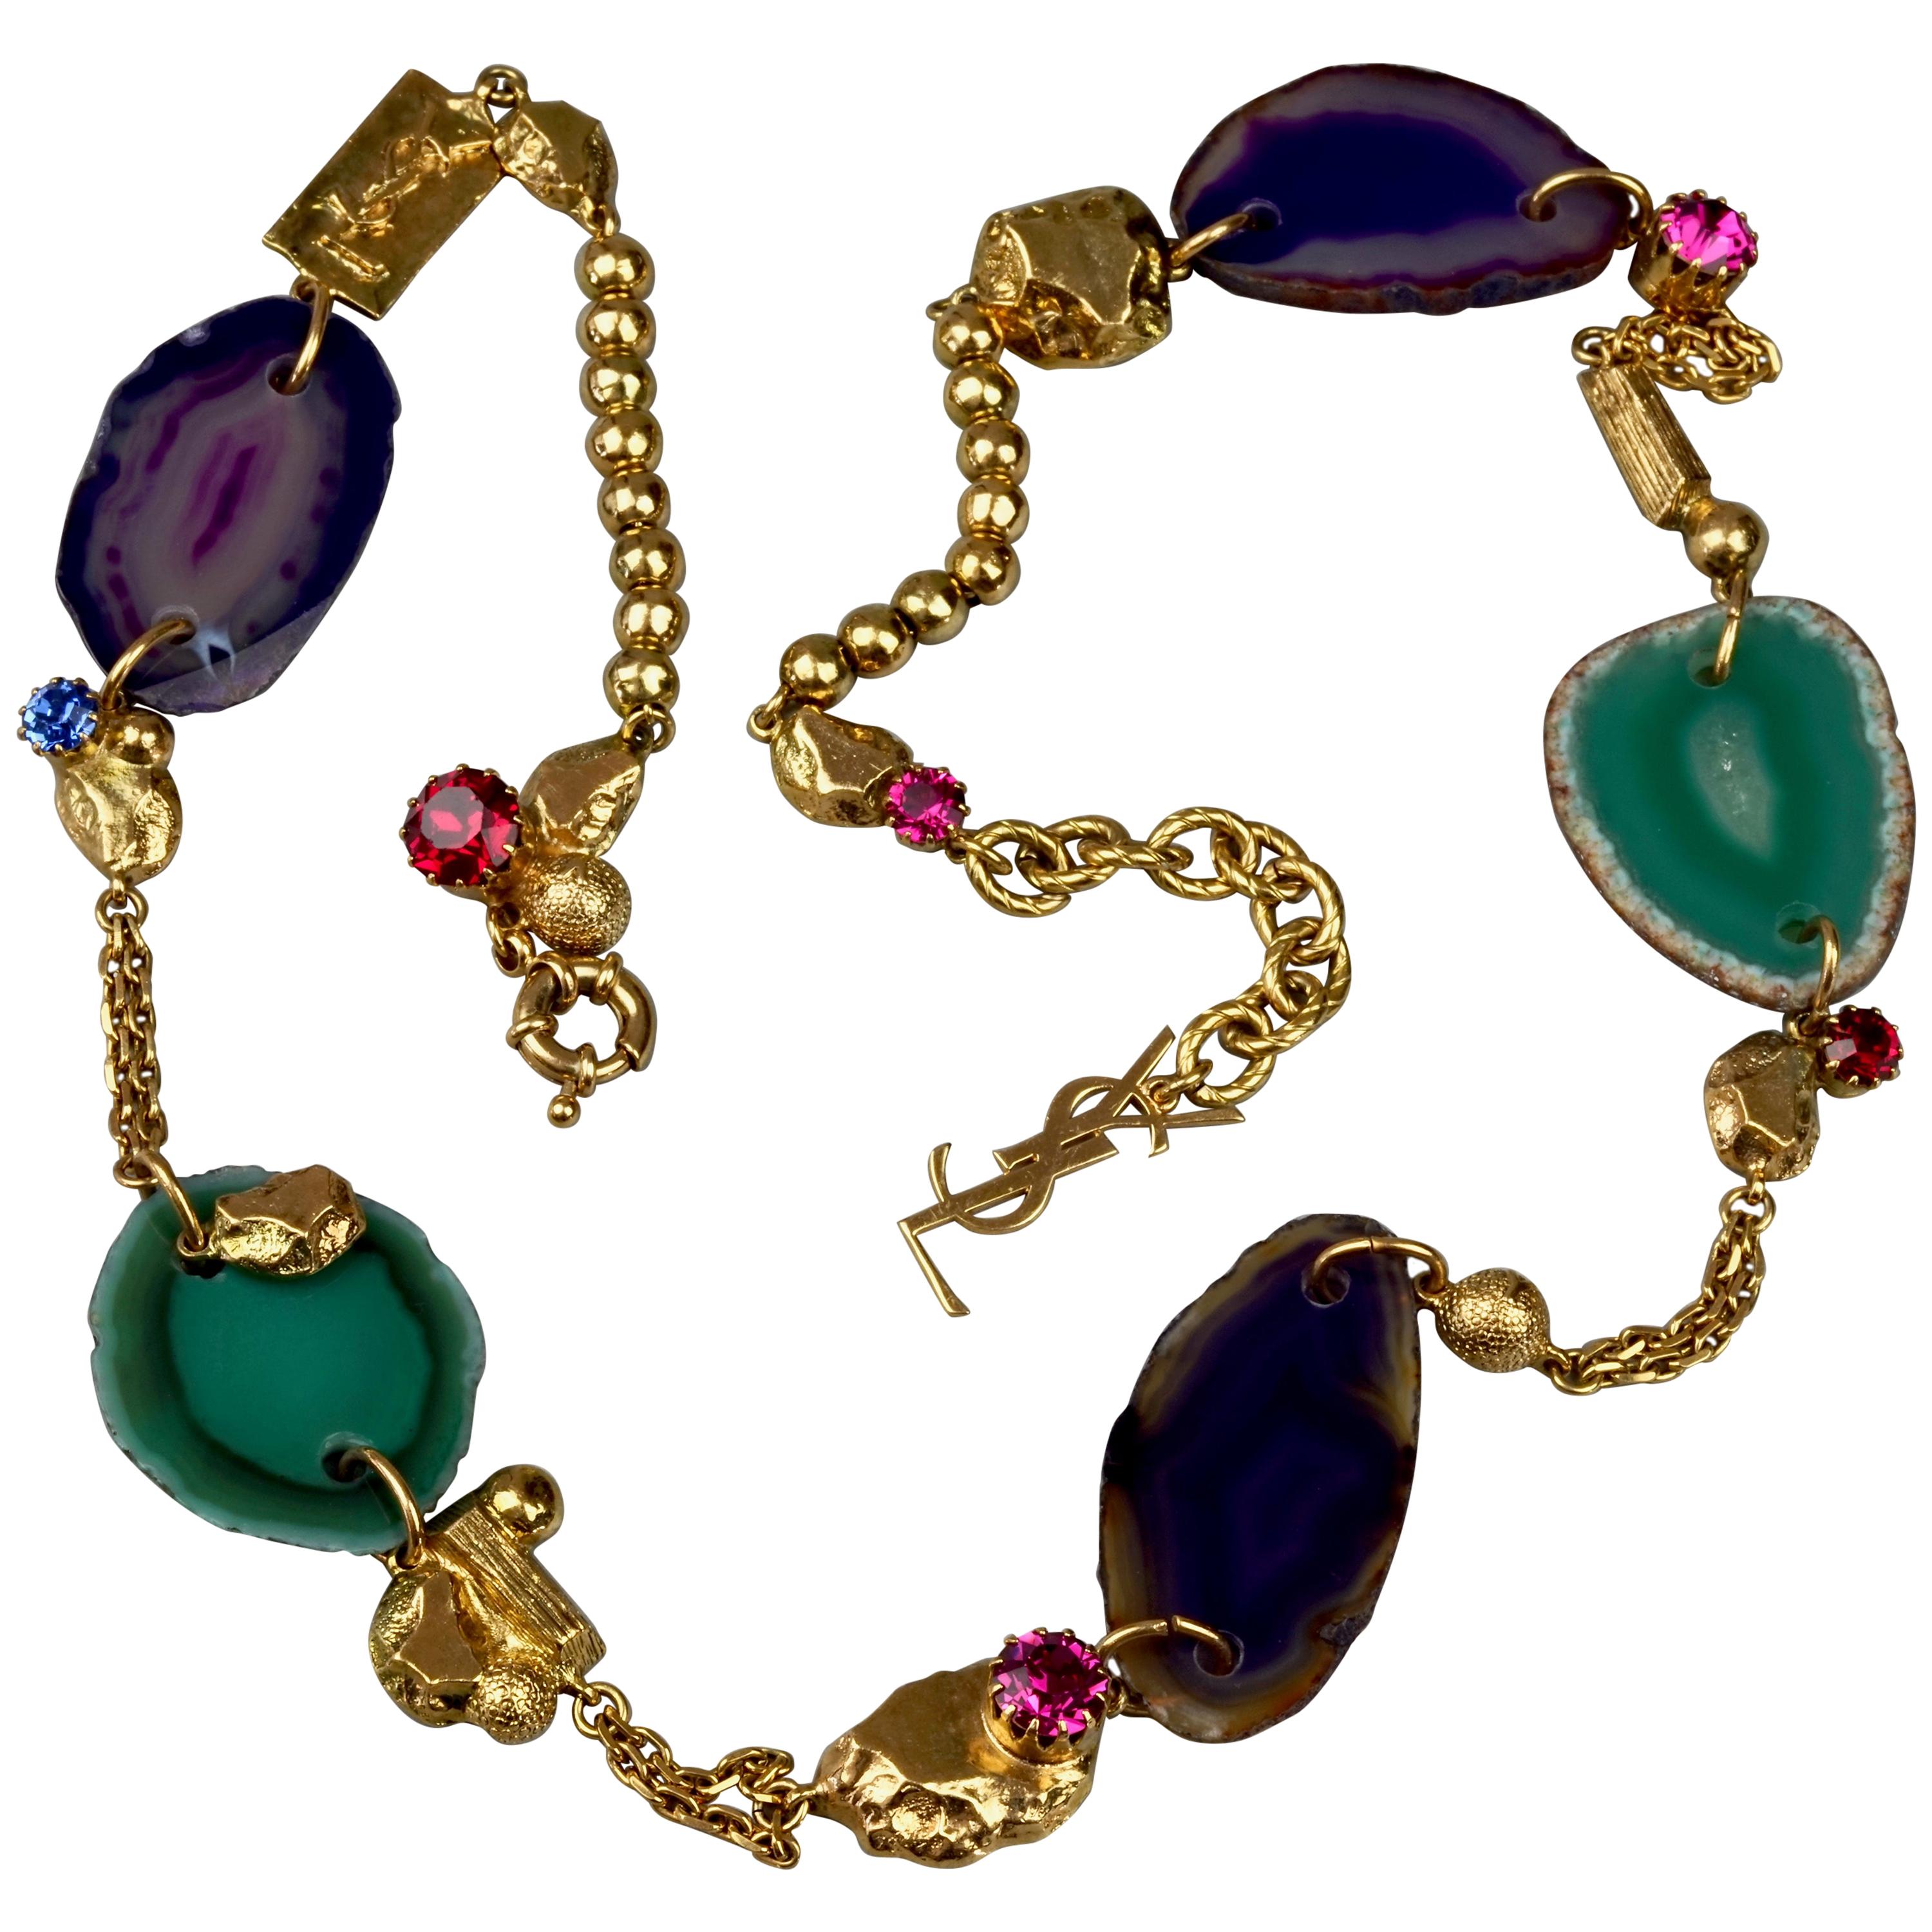 YVES SAINT LAURENT YSL "Chyc" Agate and Nugget Necklace